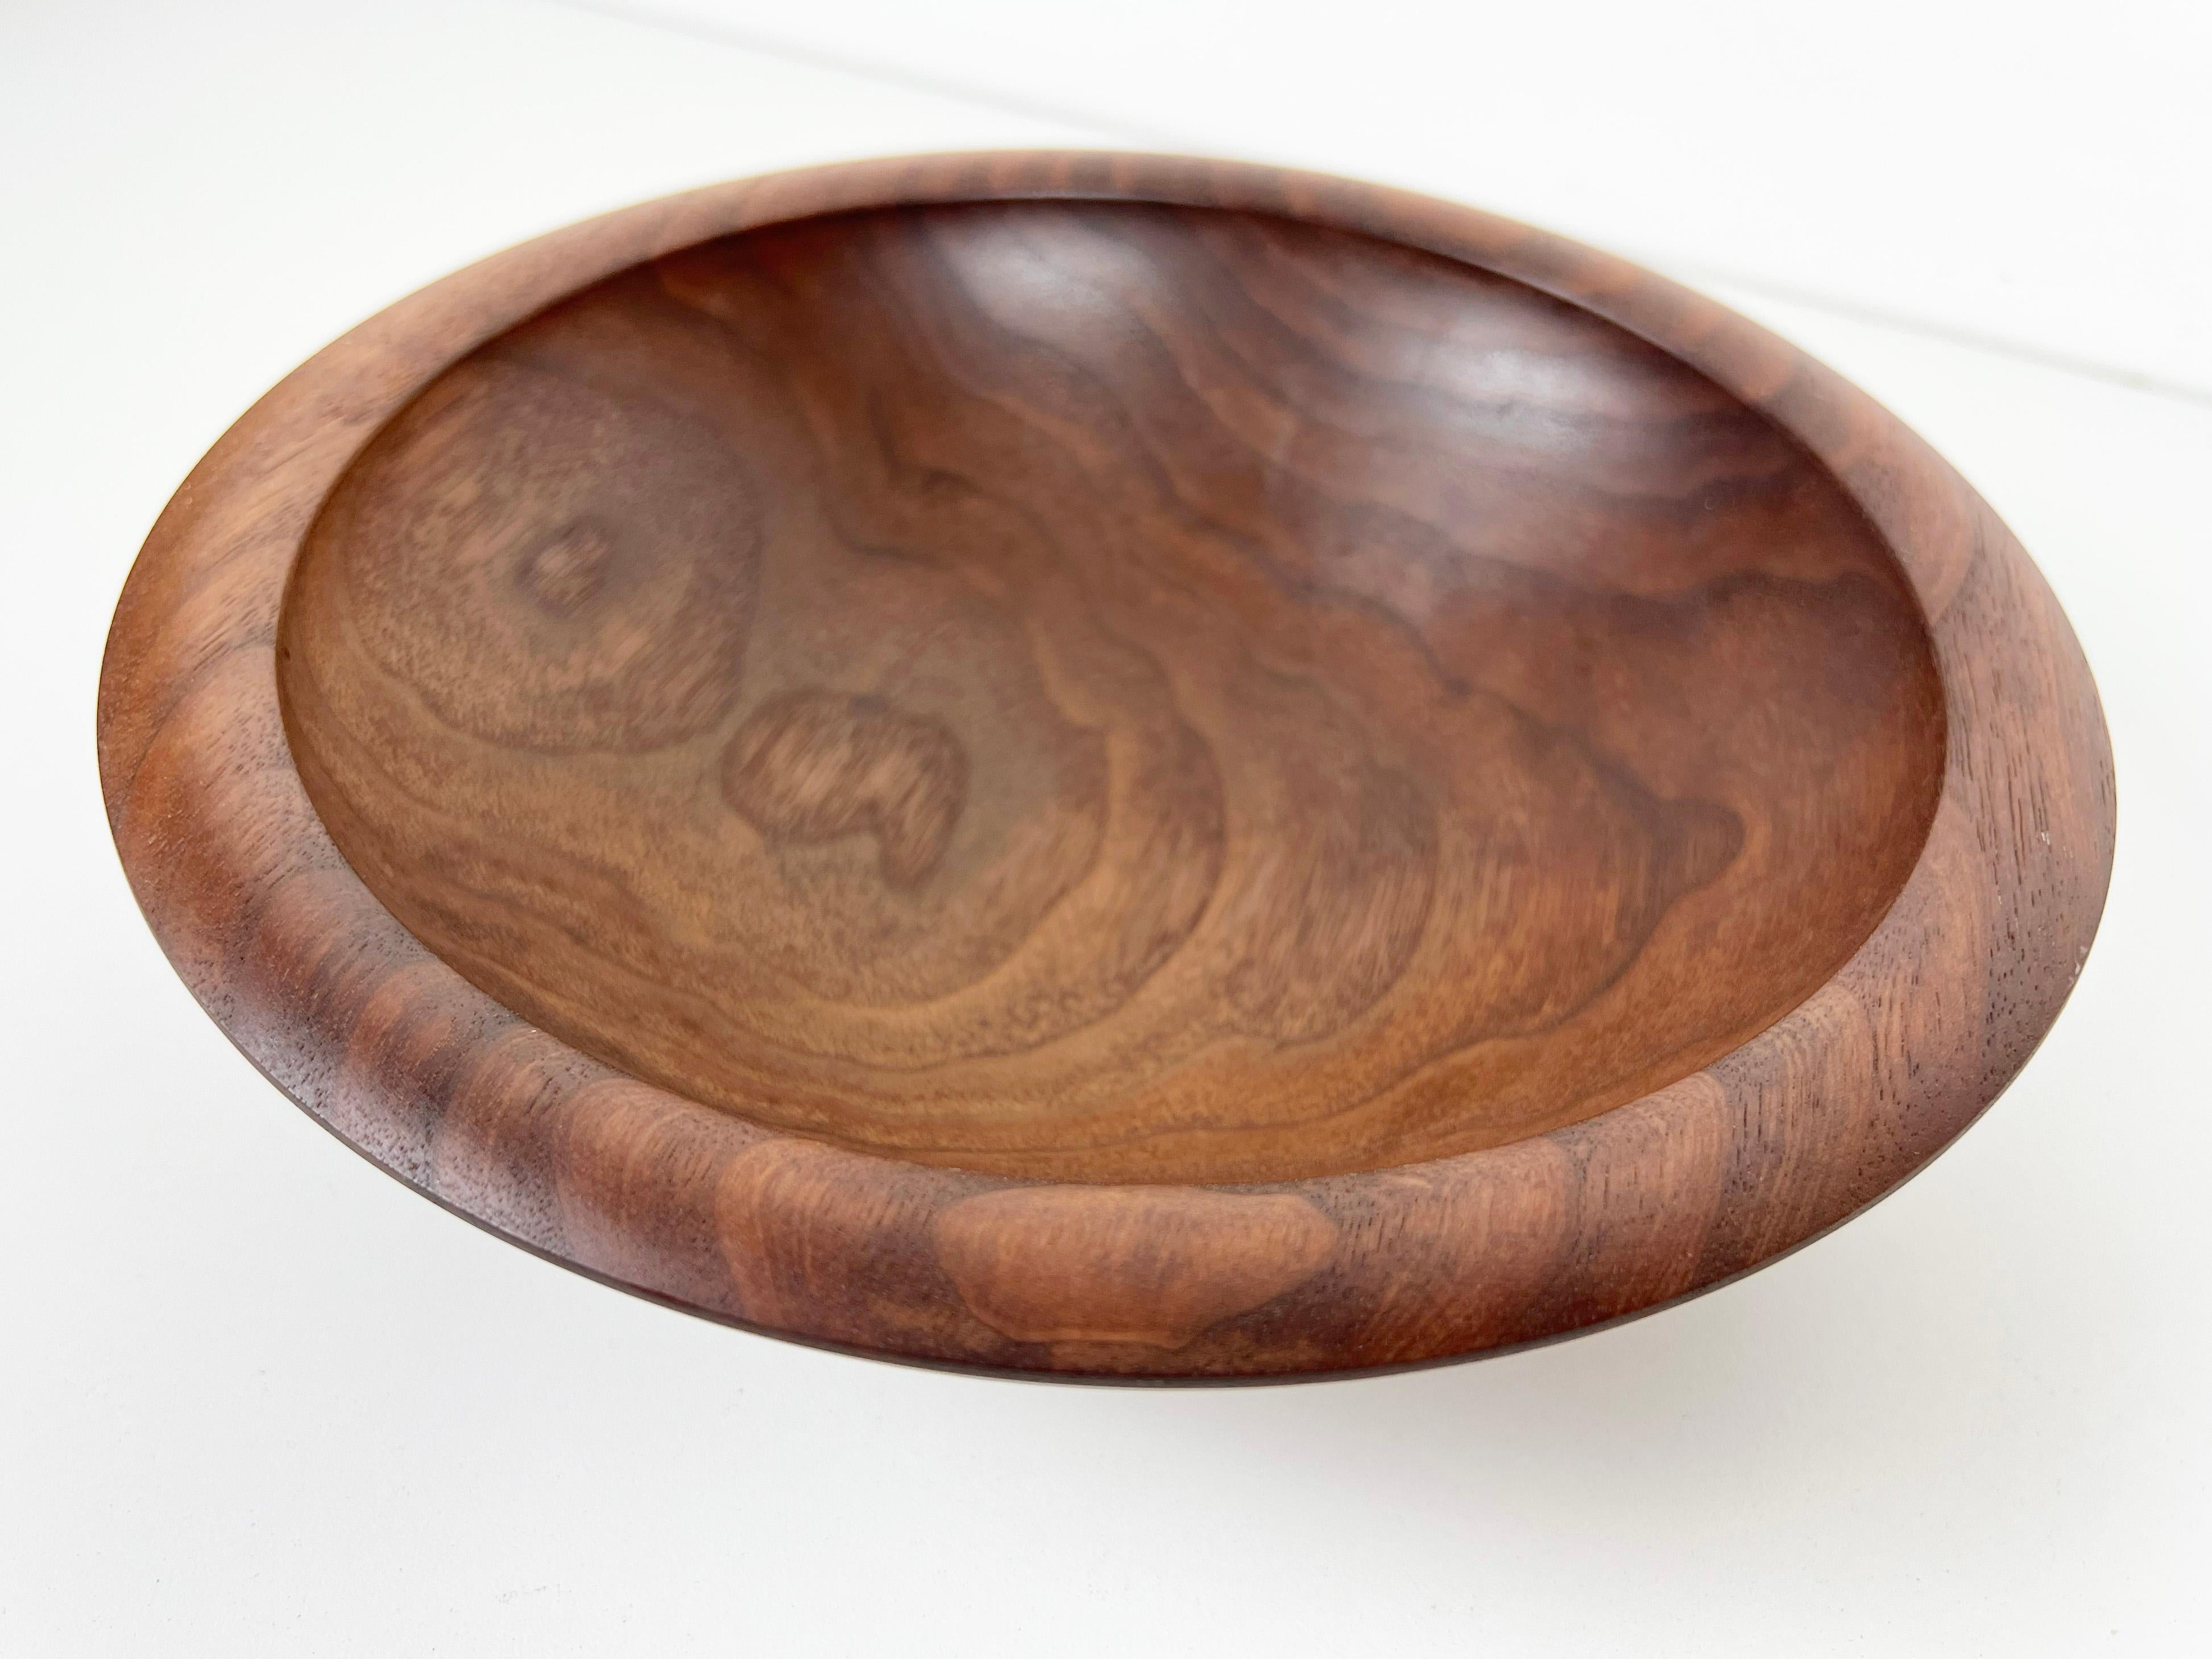 Hand-turned solid wood Champlain serving bowl crafted from beautiful walnut by Andrew Pearce. Finished with food safe allergen-free wood oil.

Artist: Andrew Pearce

Year: 2000s

Origin: Vermont, USA

Dimensions: 2.75